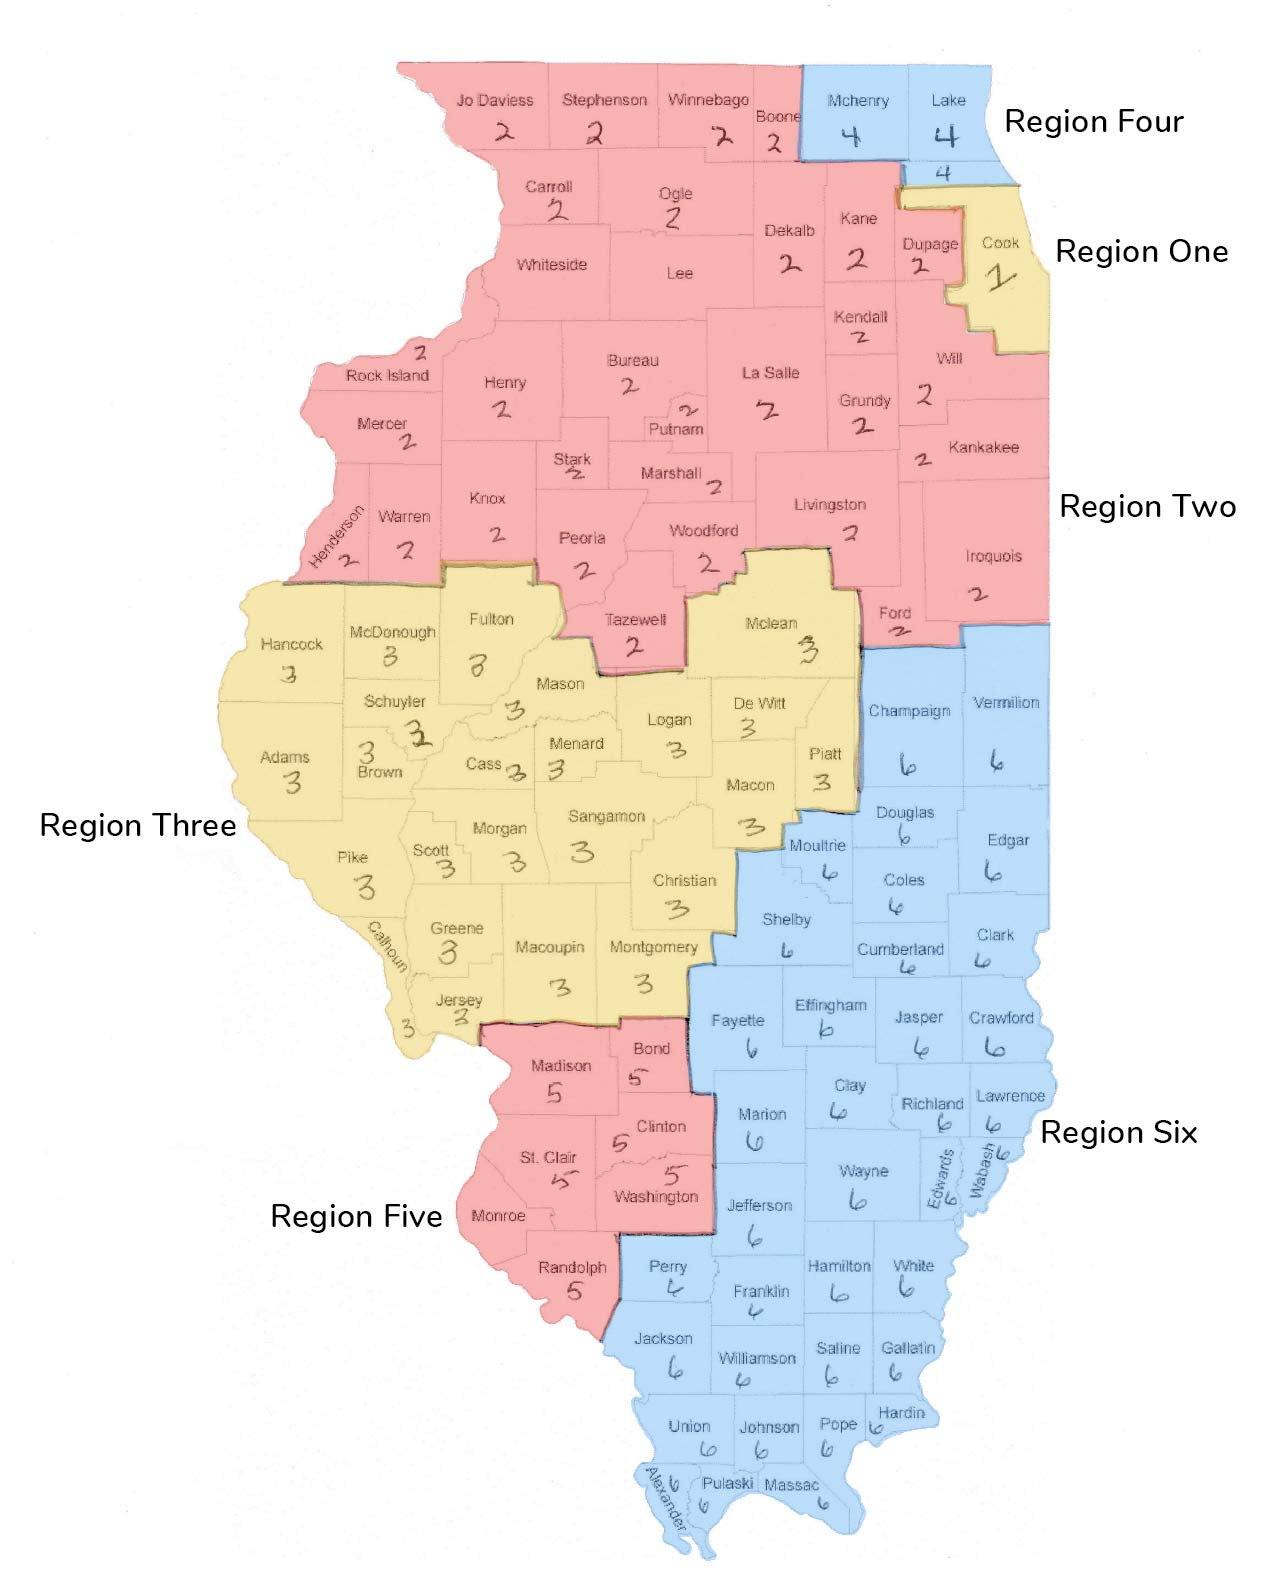 Chapters / Subdivisions - Illinois Council for Exceptional Children